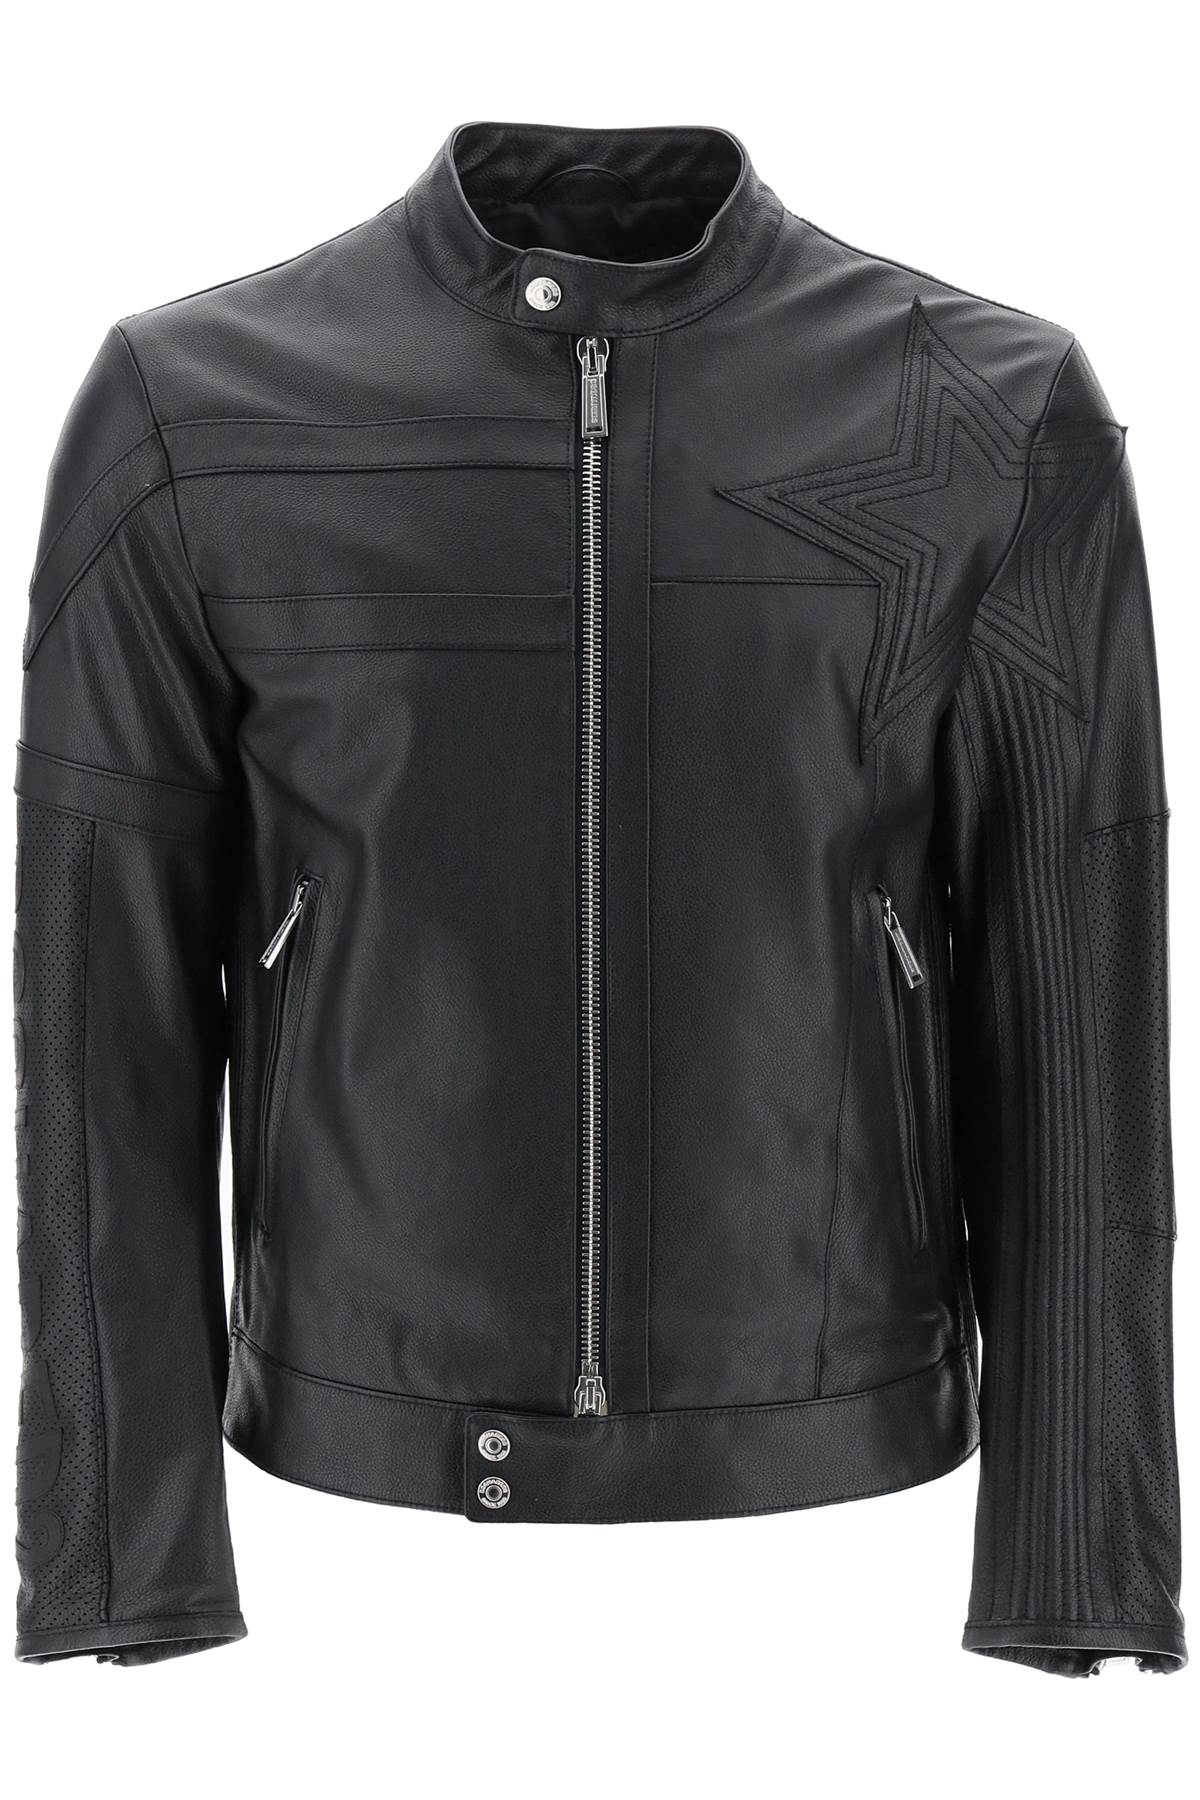 Dsquared2 leather biker jacket with contrasting lettering-0